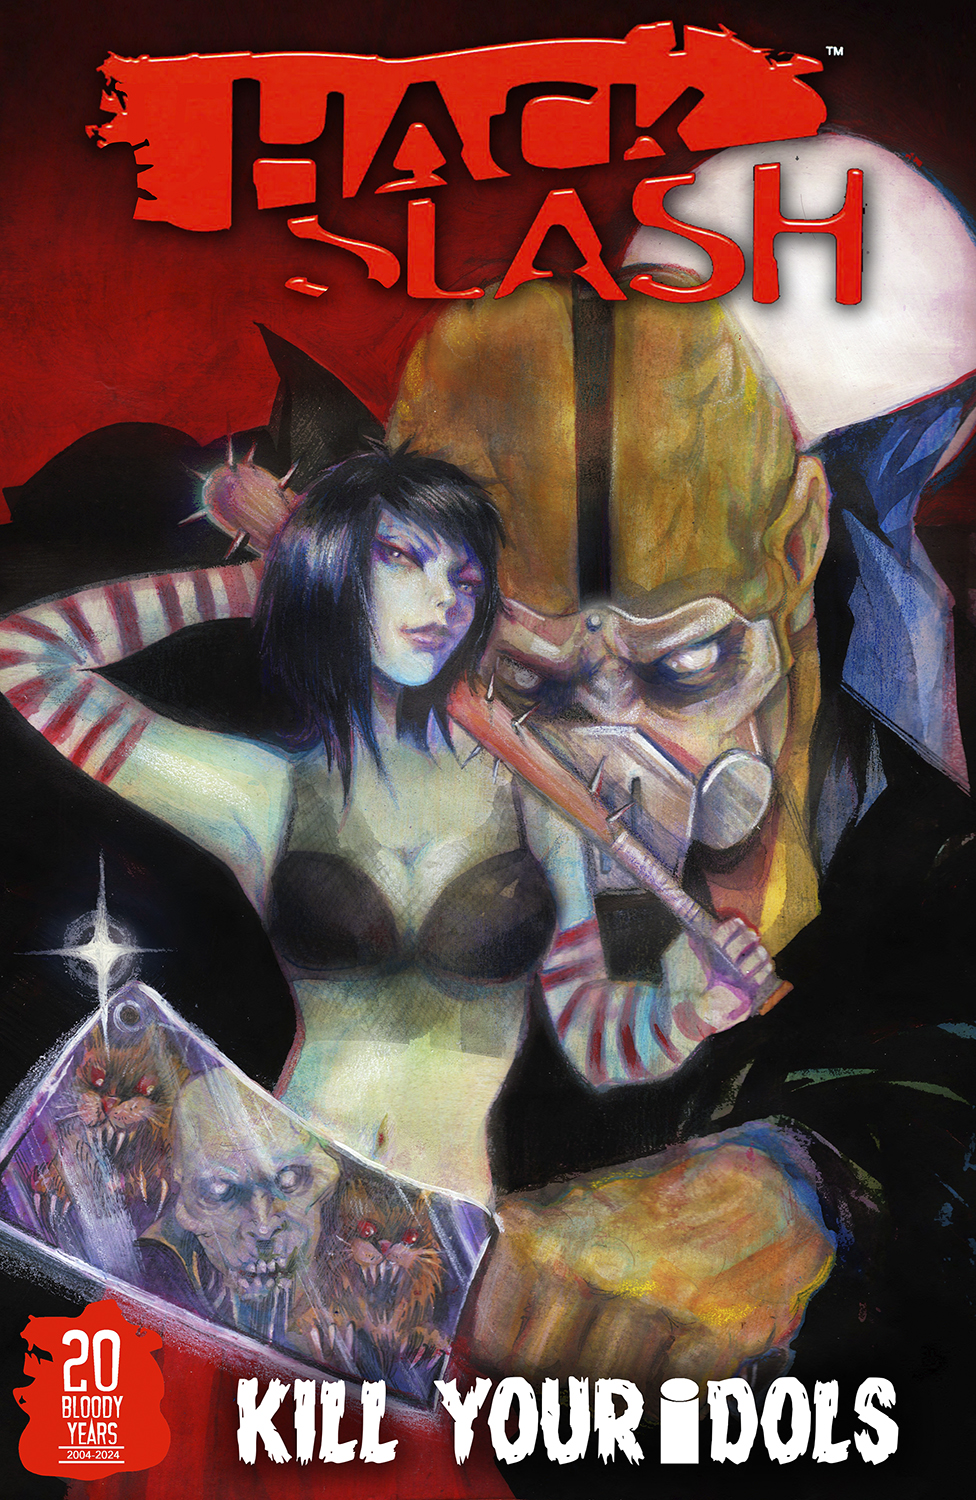 Hack Slash Kill Your Idols (One-Shot) Cover C 1 for 10 Incentive 1 for 10 Incentive